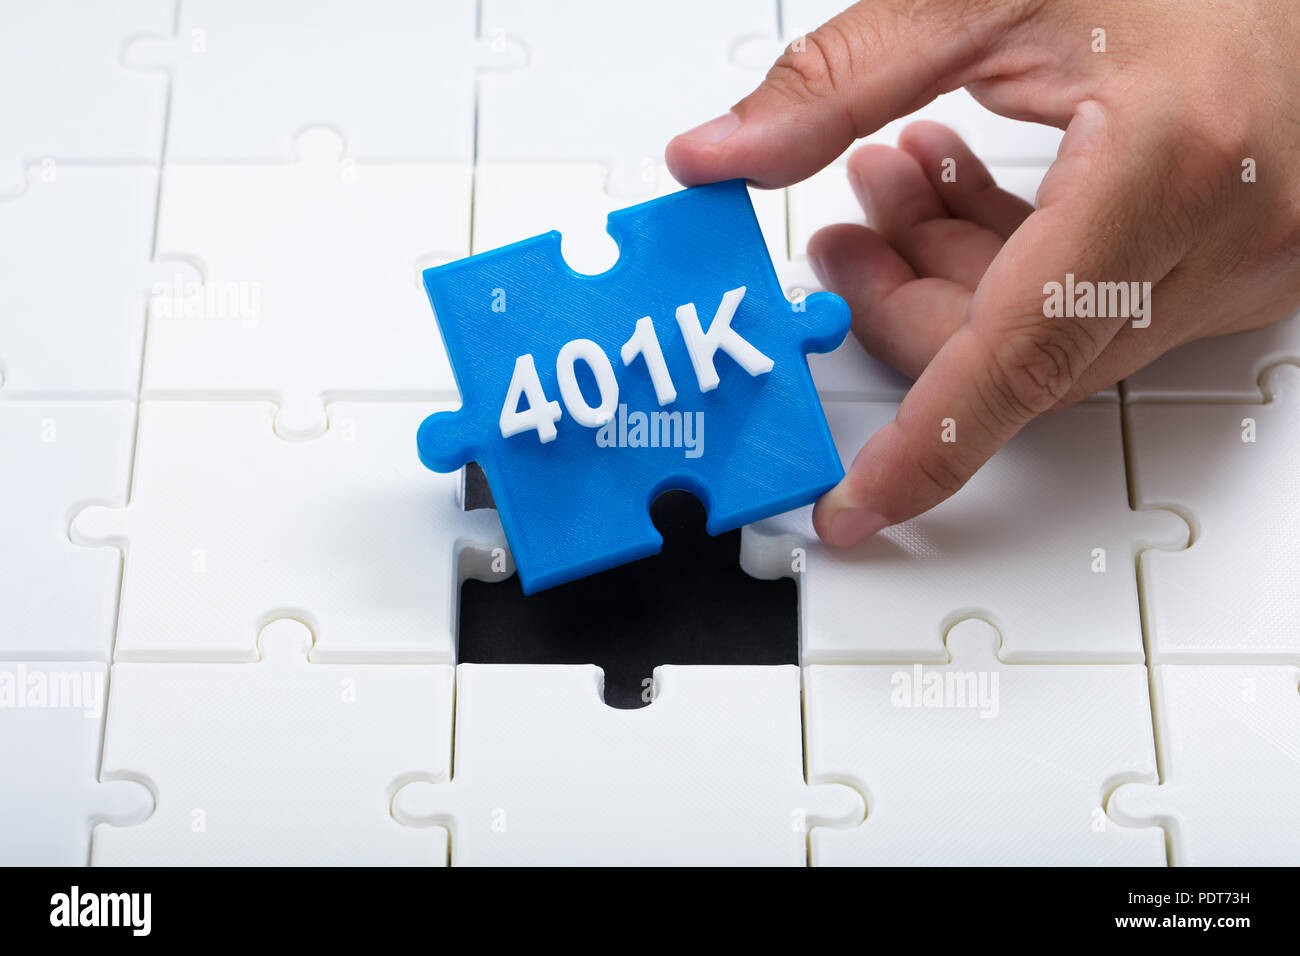 Close-up of a man's hand placing final blue 401k piece into jigsaw puzzle Stock Photo